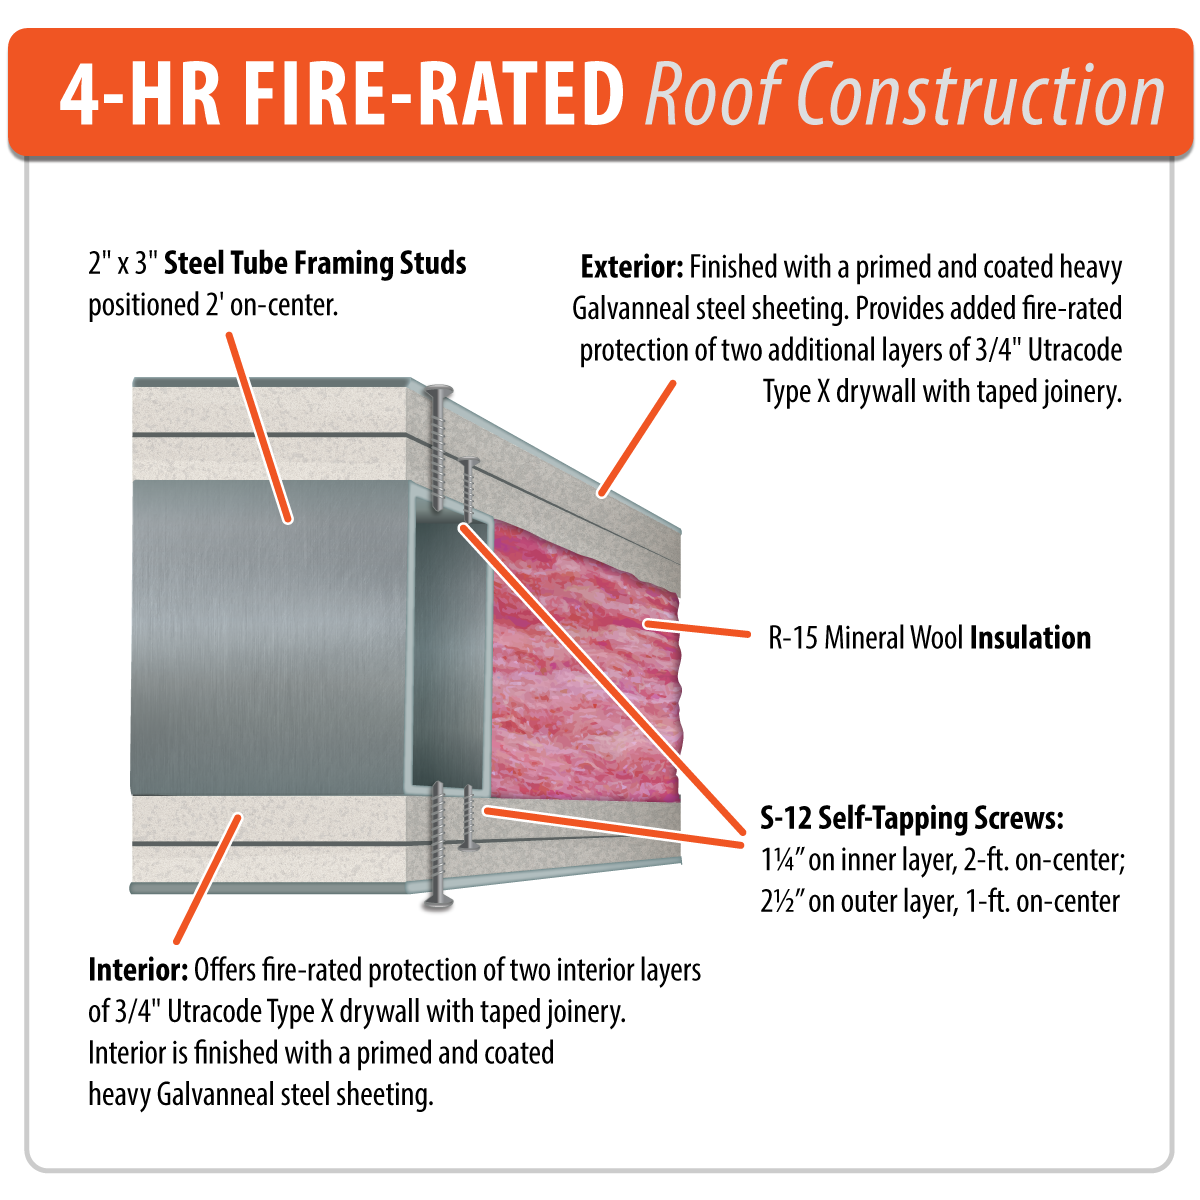 4 Hr Fire-Rated Roof Construction Feature